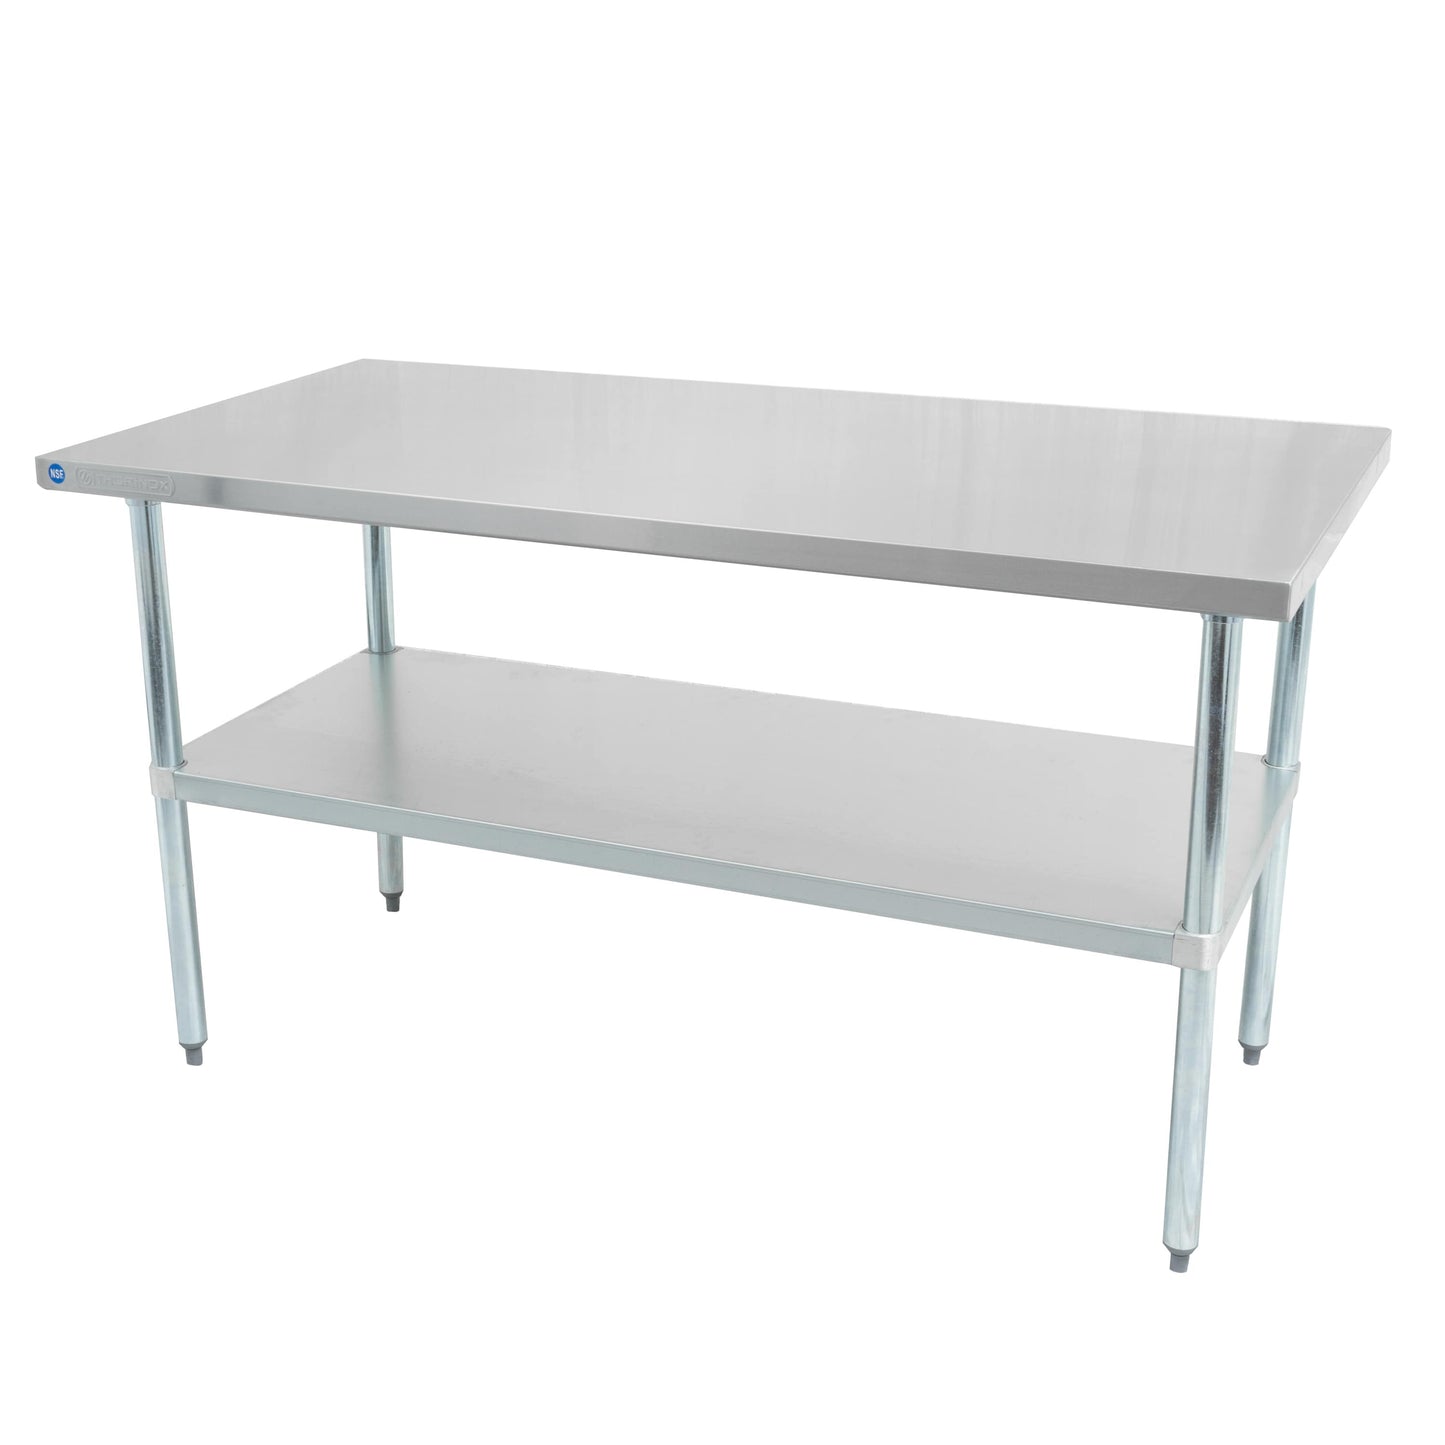 Thorinox DSST-3060-GS Table, 60"W x 30"D x 34"H, Stainless Steel Table with Galvanized Shelf